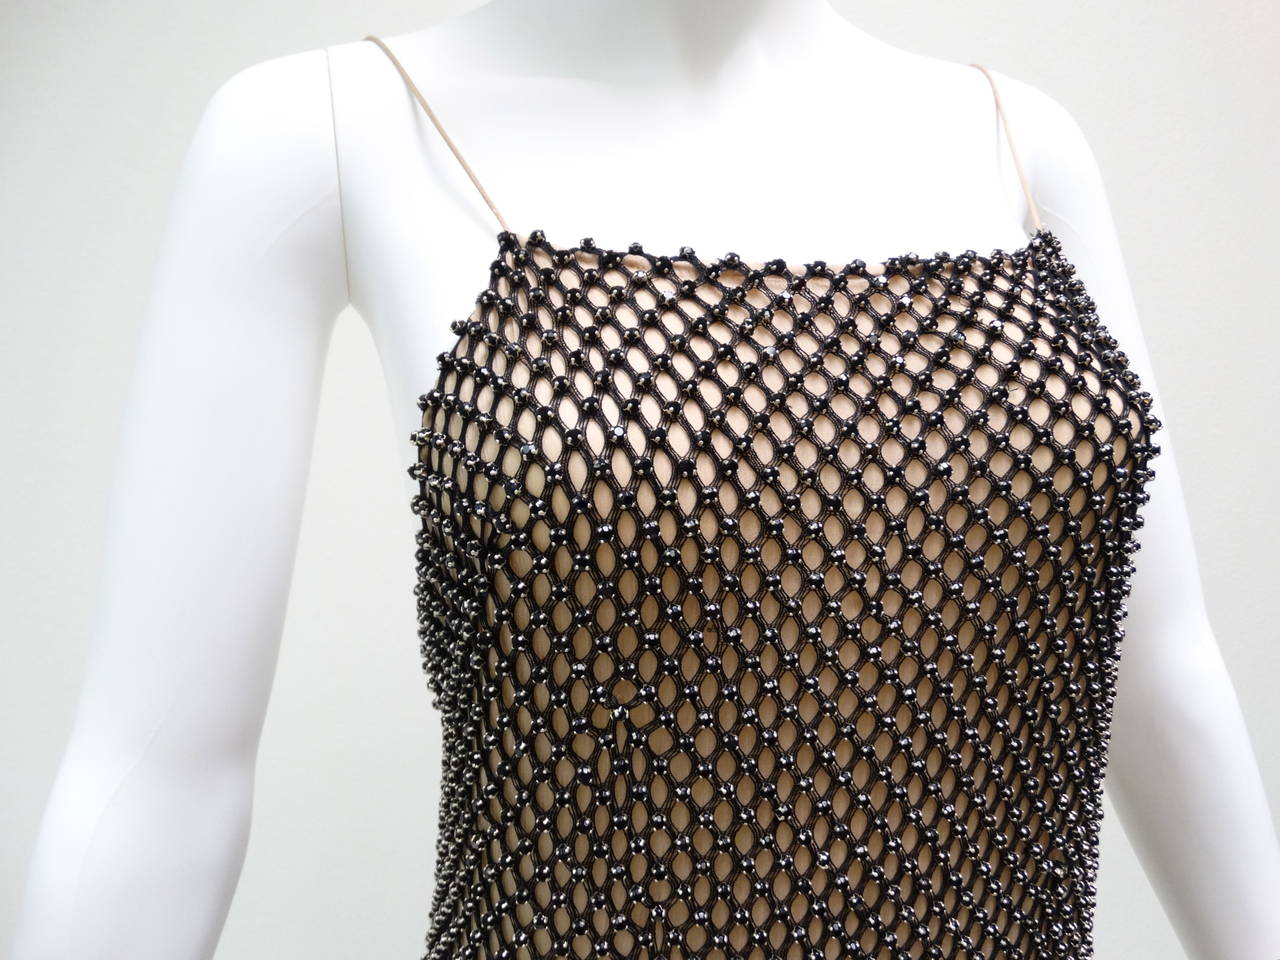 2006 Gucci Black Rhinestone Evening Gown with a Deep Scoop Back… This dress is covered in black rhinestones with a intriquit weave pattern. It has fine spaghetti straps, which are reinforced with double stitch attached to a fully lined silk chiffon